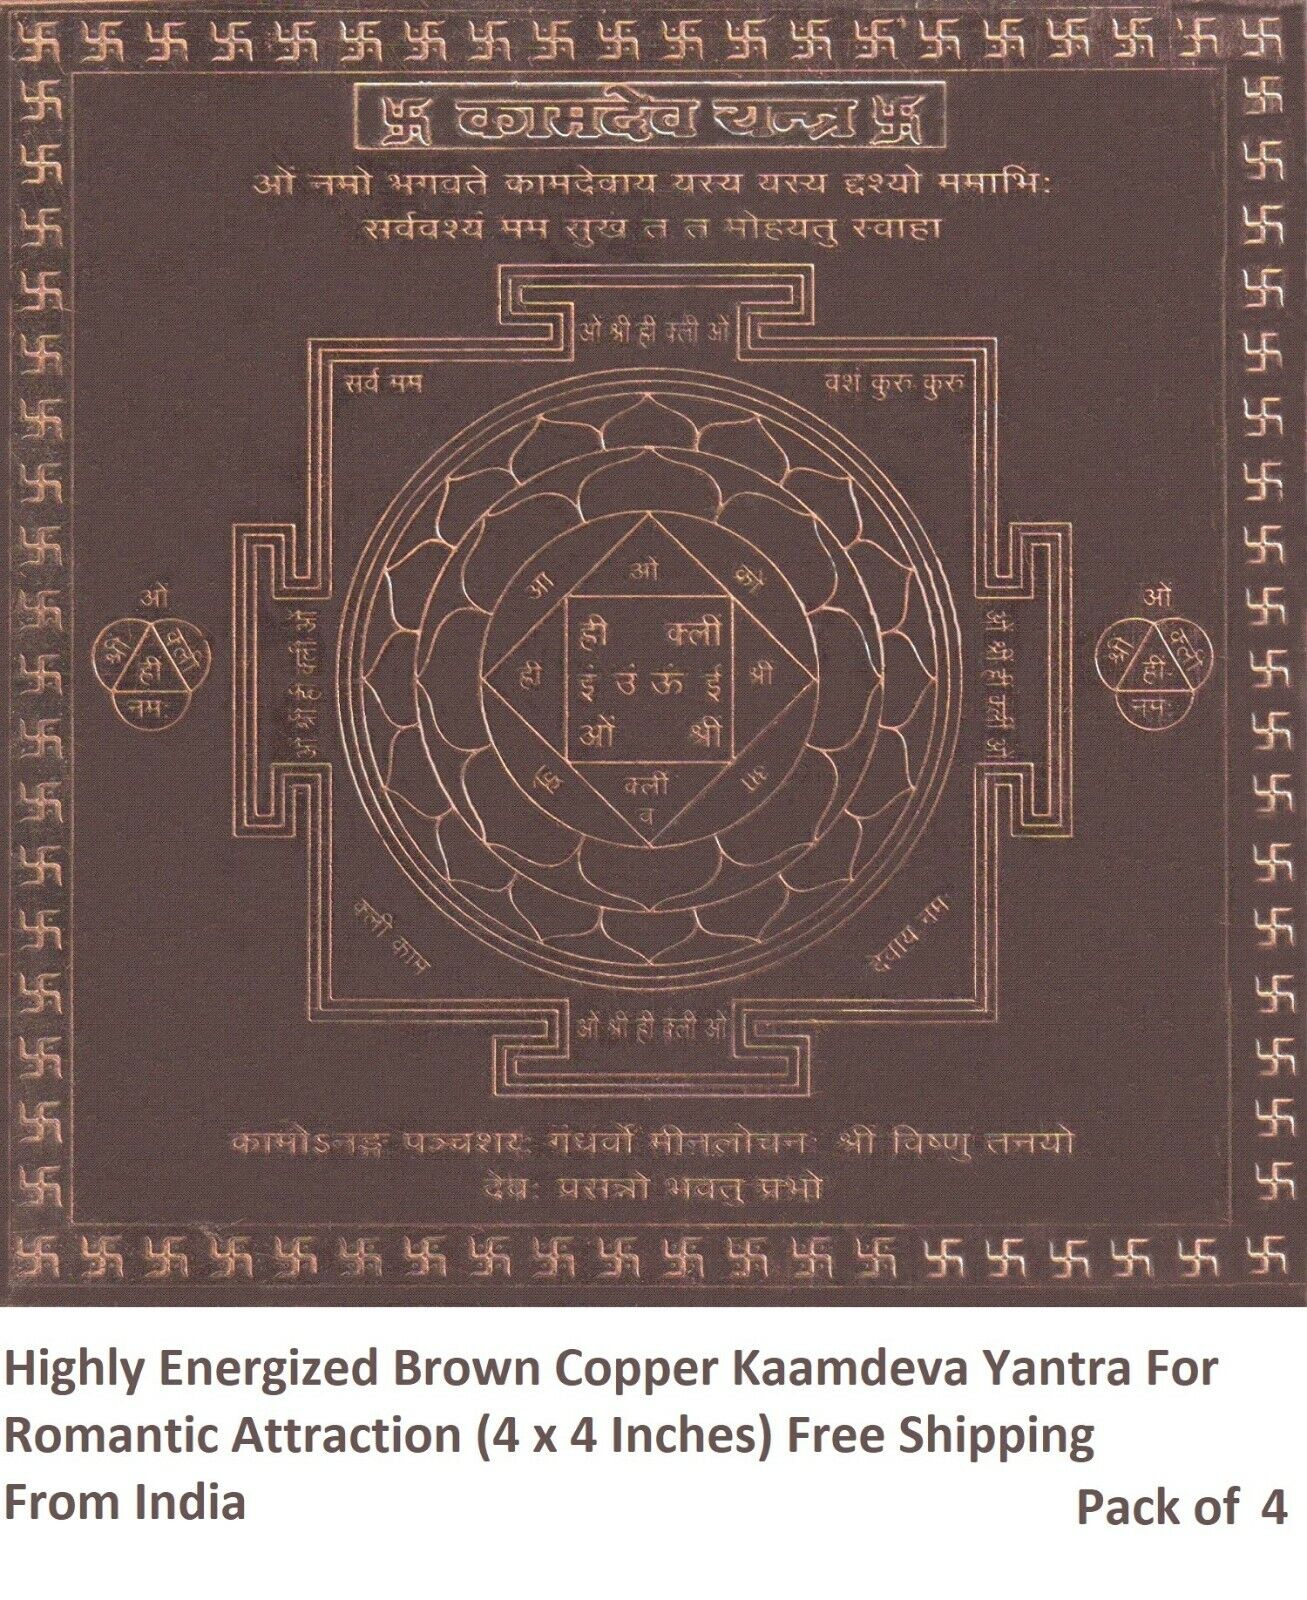 4 x Highly Energized Brown Copper Kaamdeva Yantra For Romantic Attraction